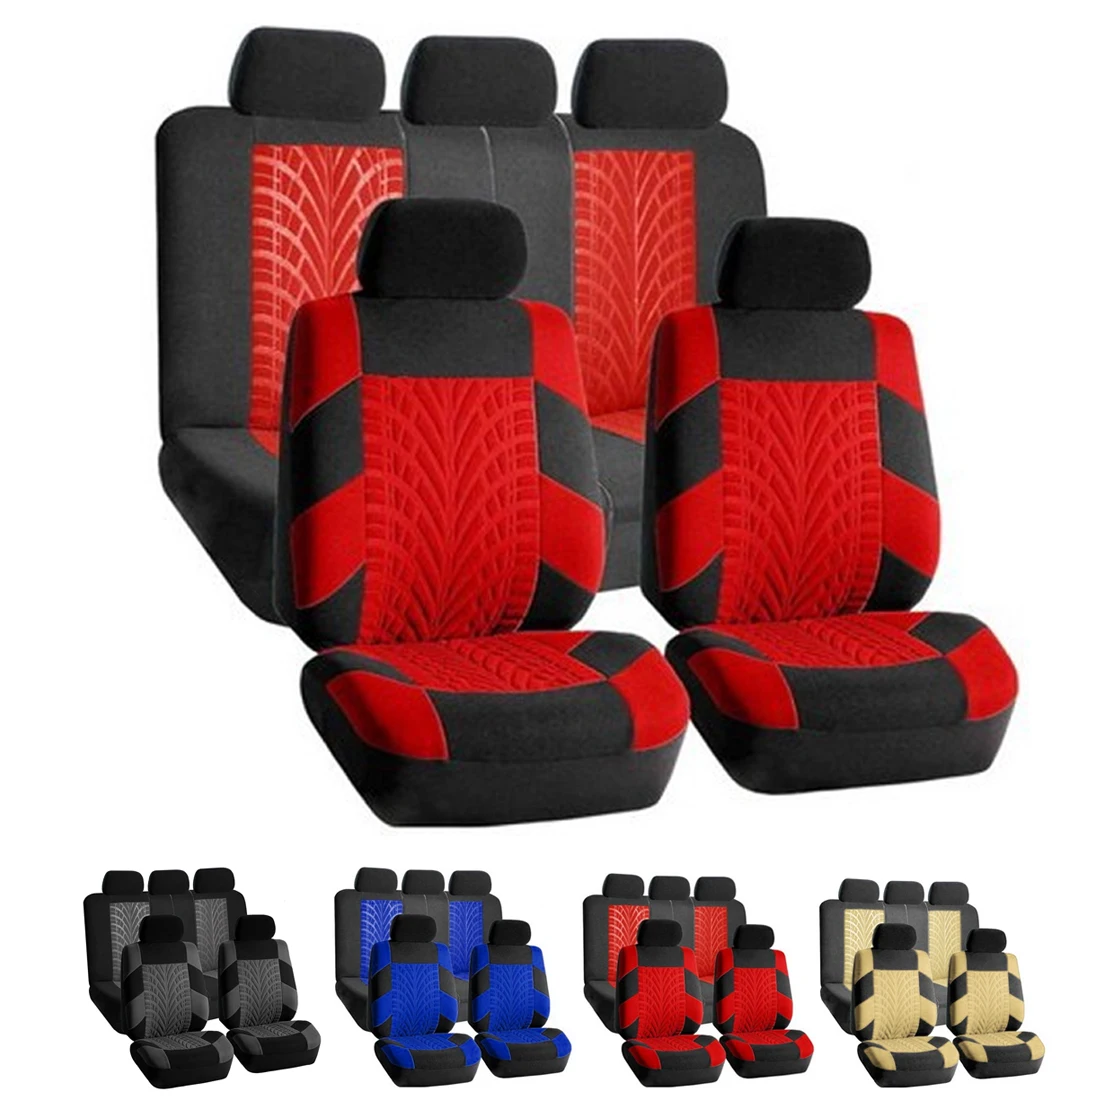 Dewtreetali Full Set Automobiles Seat Covers Universal Car Seat Covers Protector Polyester Four Seasons Interior Accessories